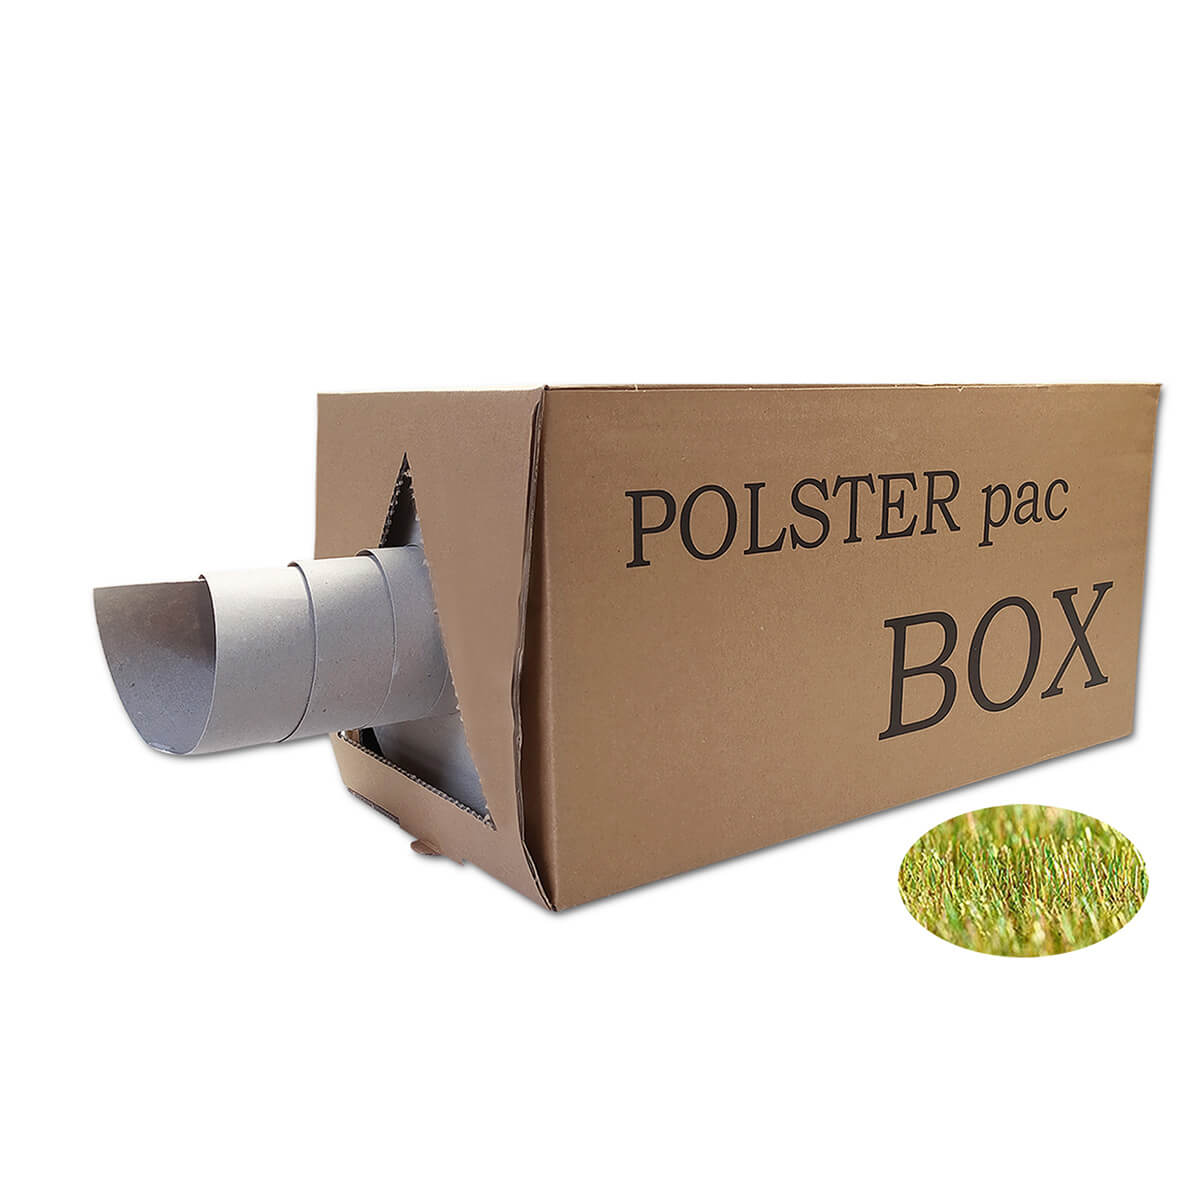 Paper padding dispenser box wrapping paper 37,5 cm x 200 m grass paper 80g|m² filling material